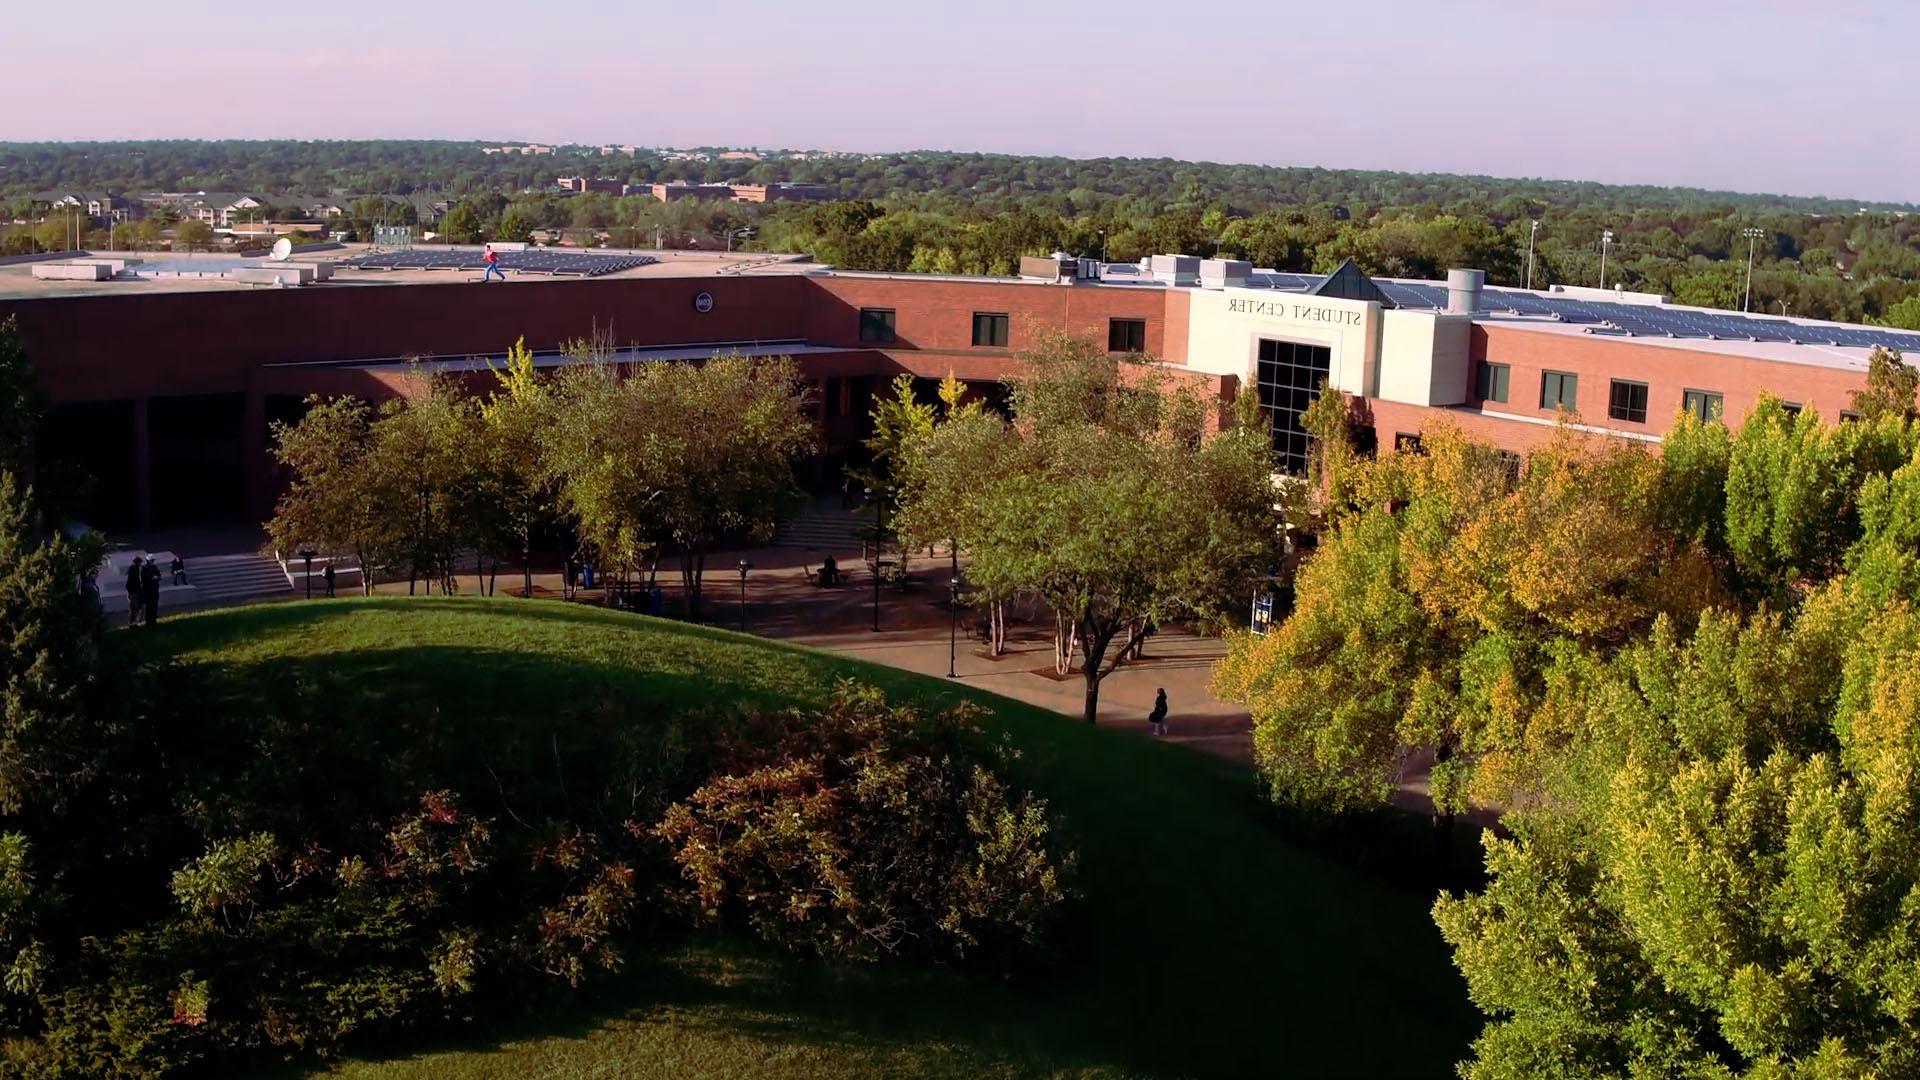 Drone aerial shot of the campus featuring the Student Center